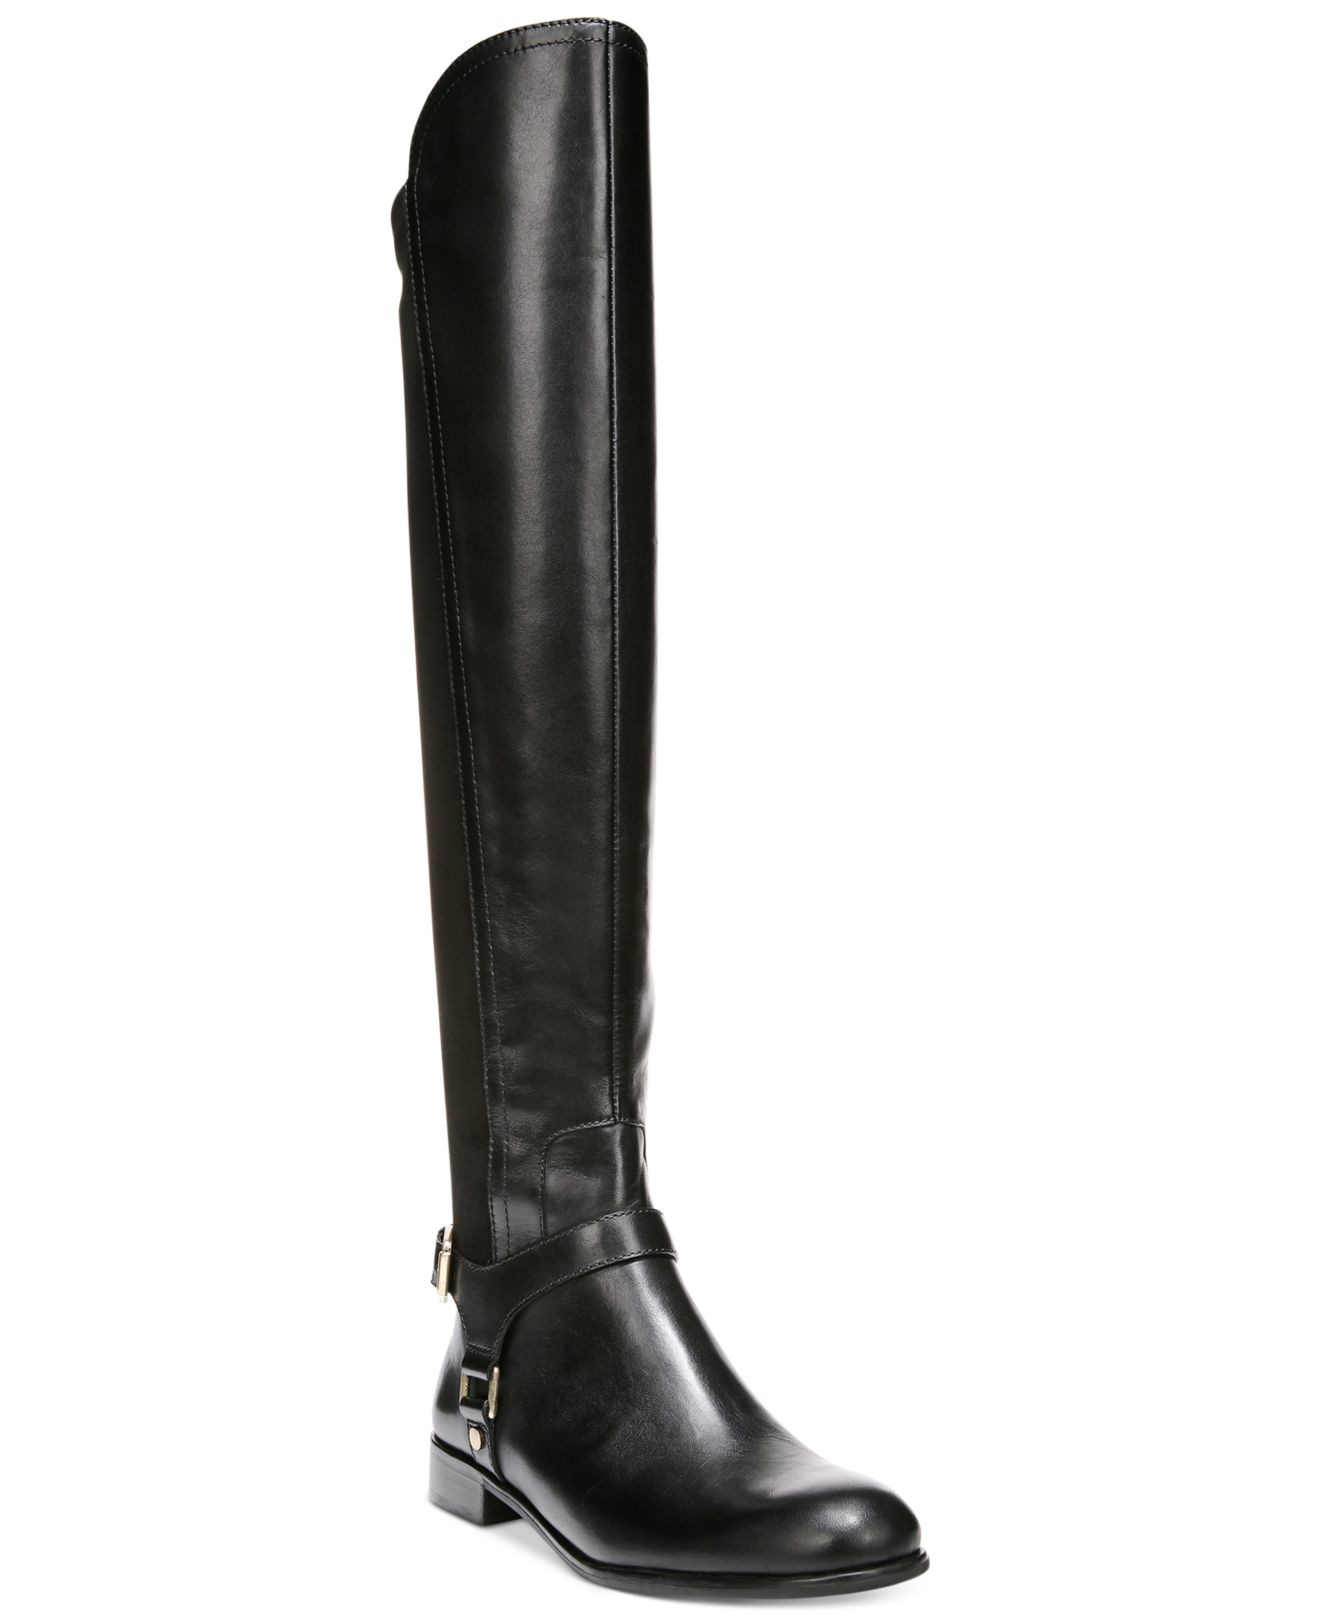 Lyst - Franco Sarto Mast Over-the-knee Boots in Black